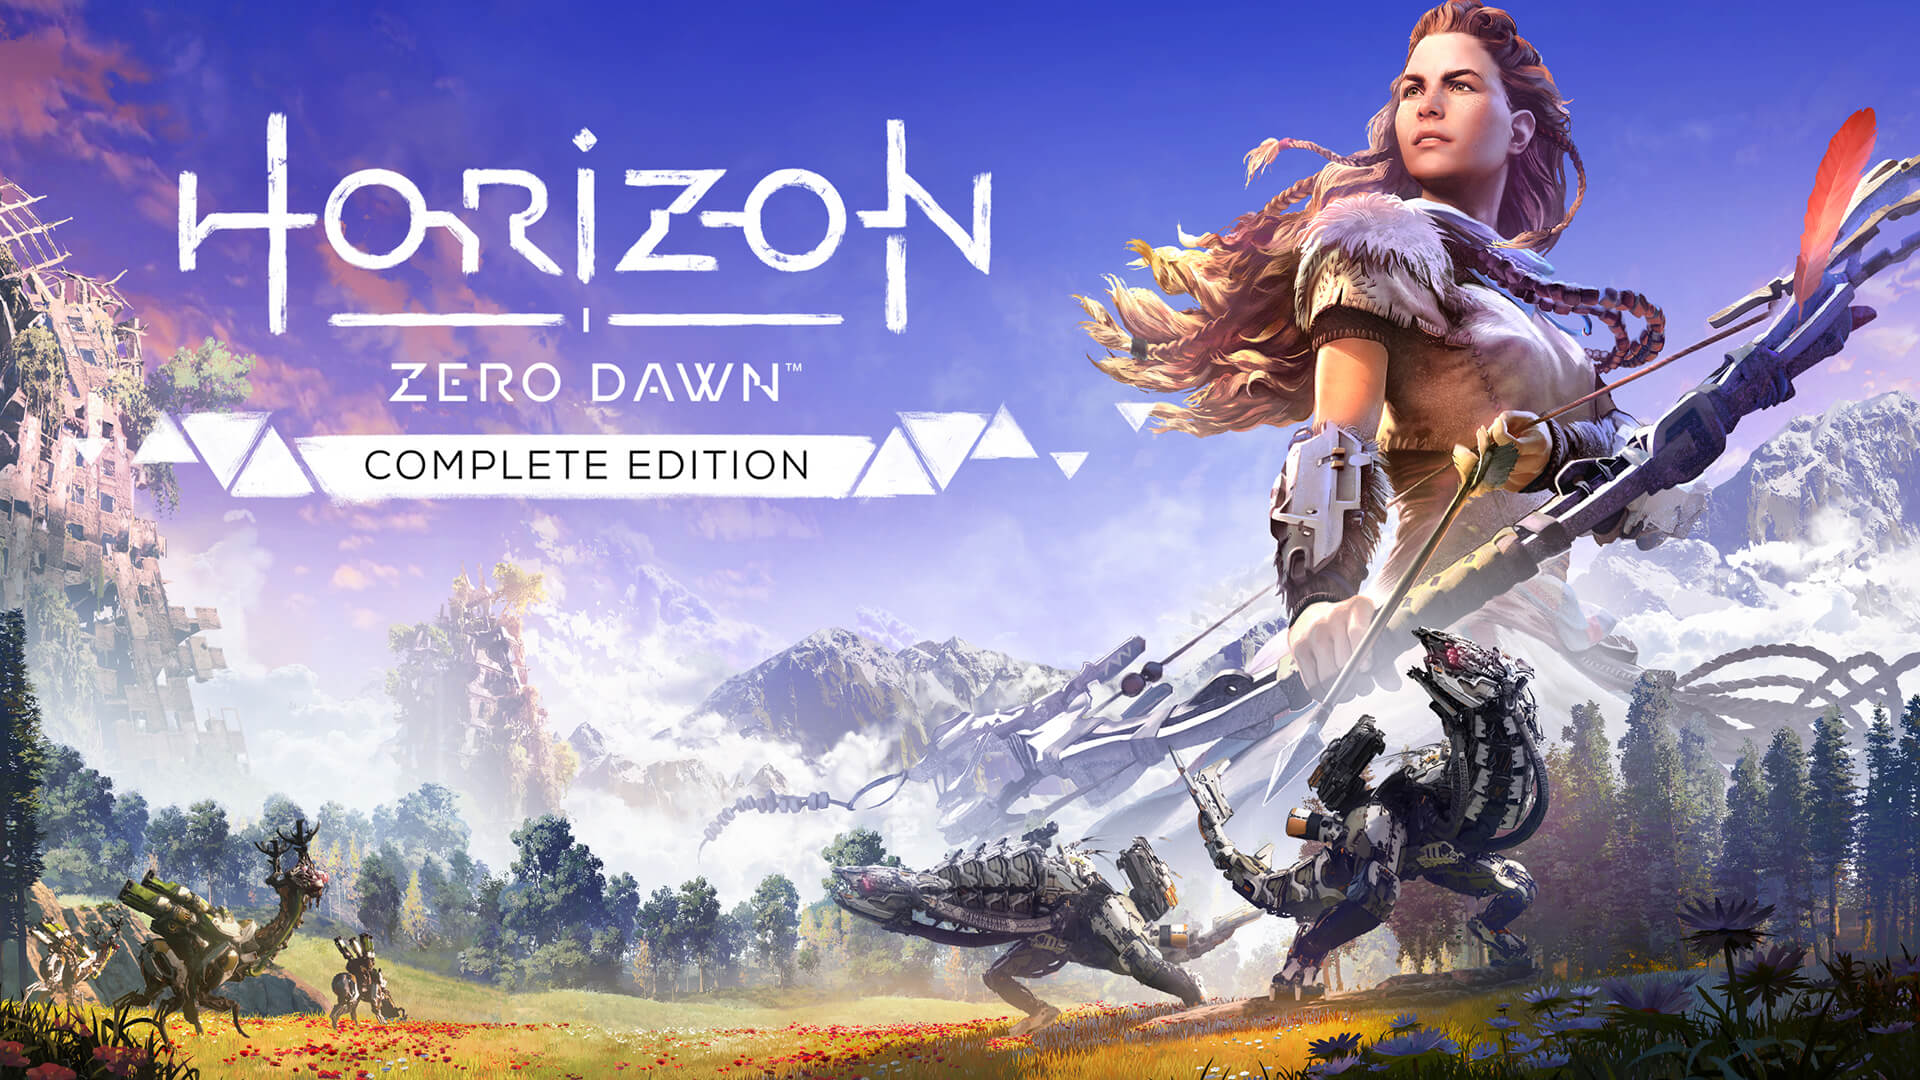 Horizon Zero Dawn Update 1.09 Patch Notes for PC is out